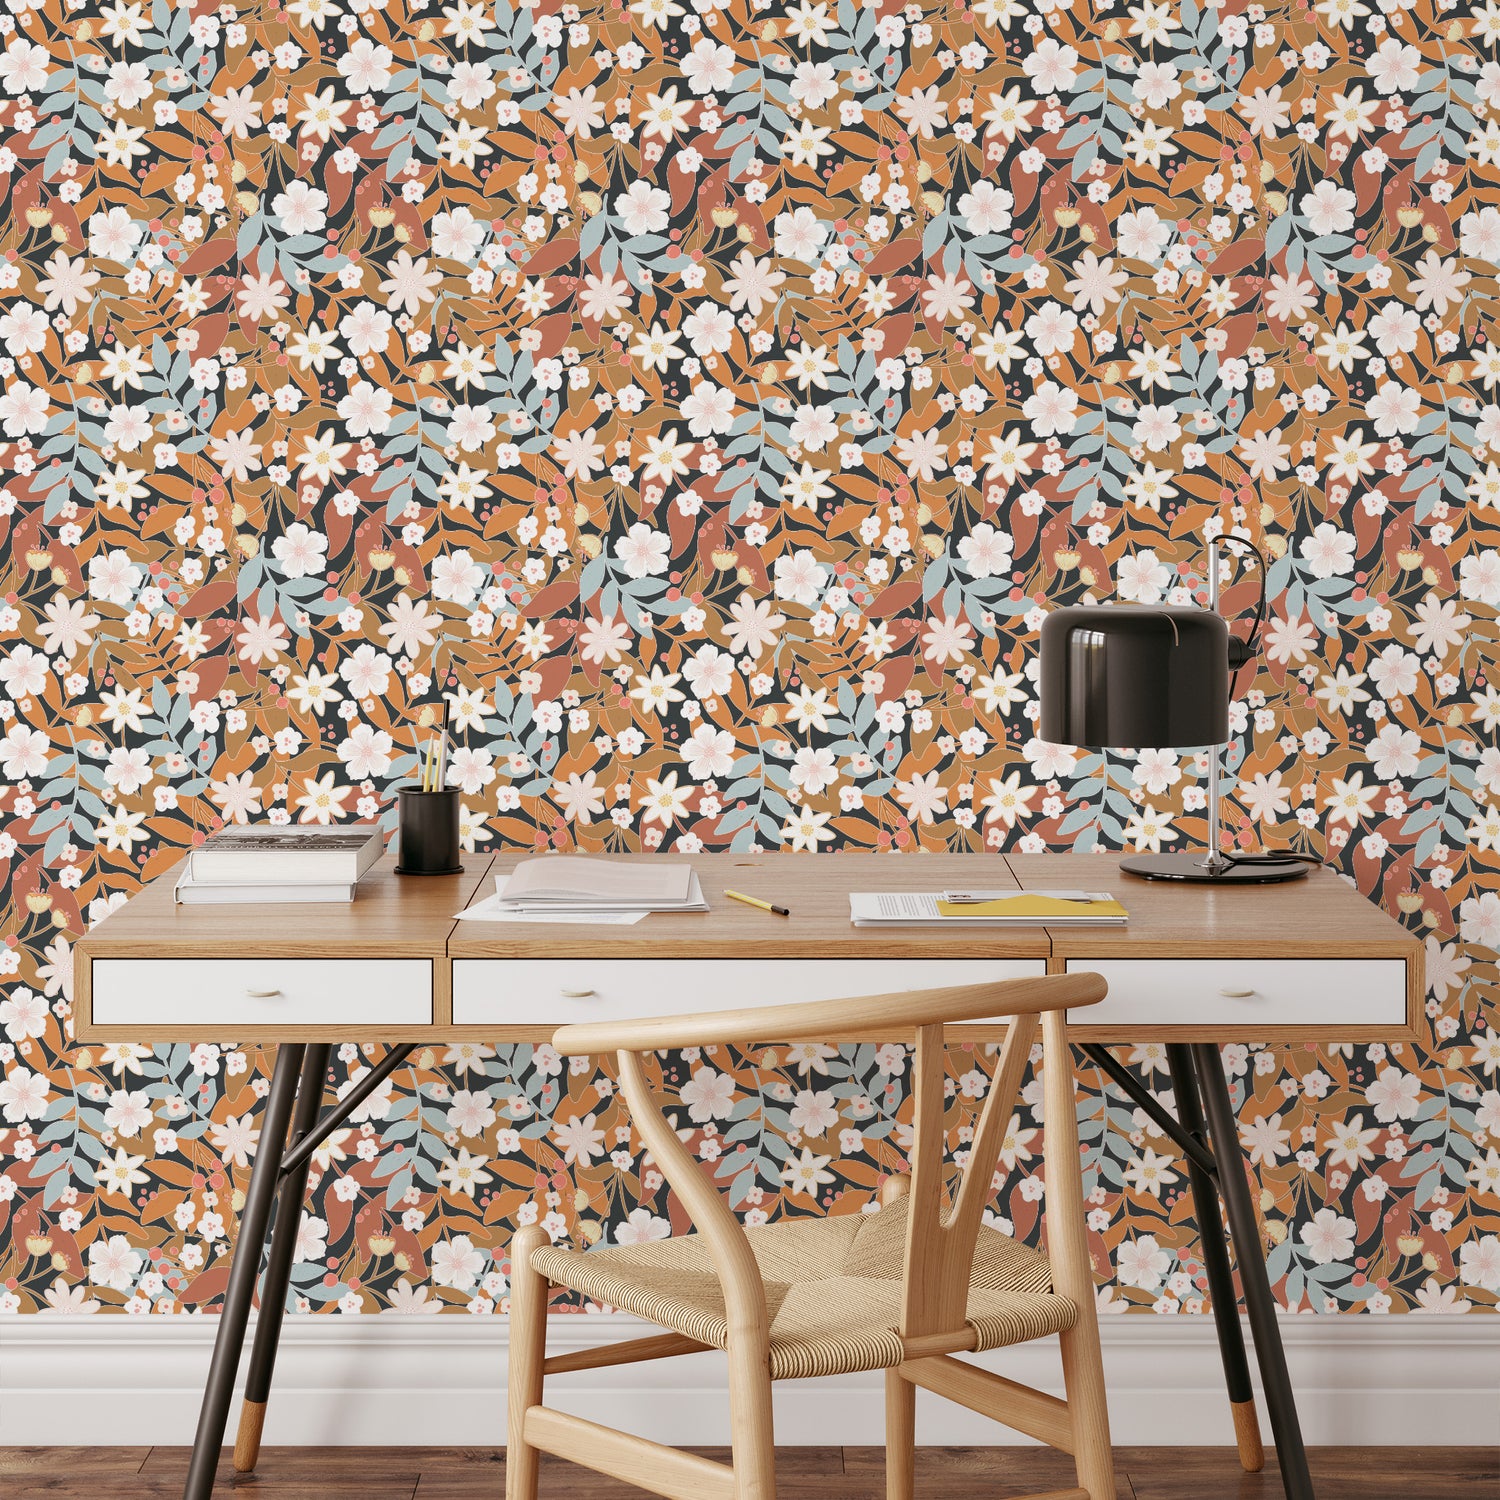 Transform your space into a luxurious haven with our Bold and Beautiful Wallpaper in Crisp Autumn Orange shown in full size image.